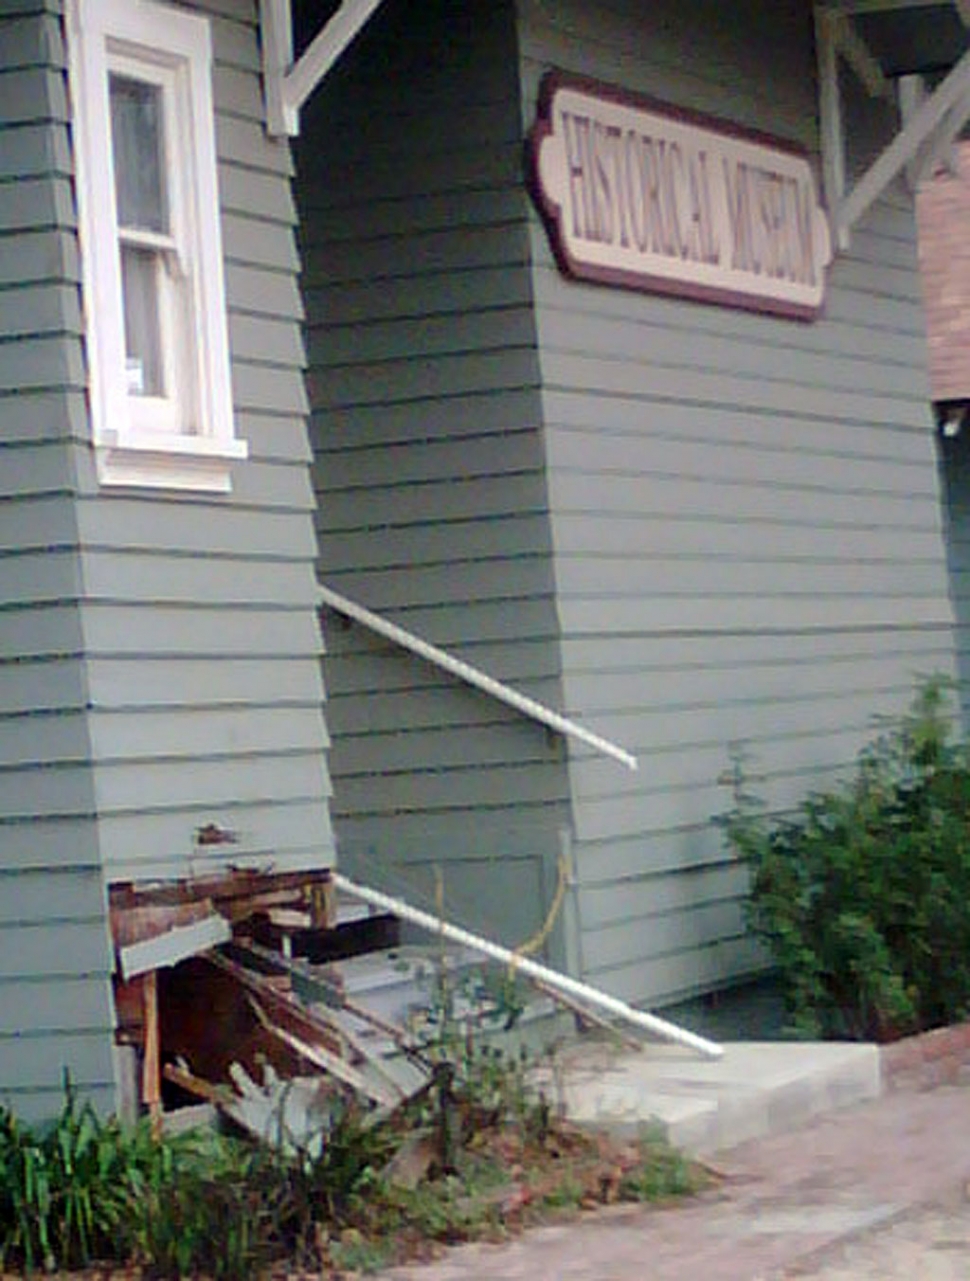 Hit and run damage to the Fillmore Historical Museum